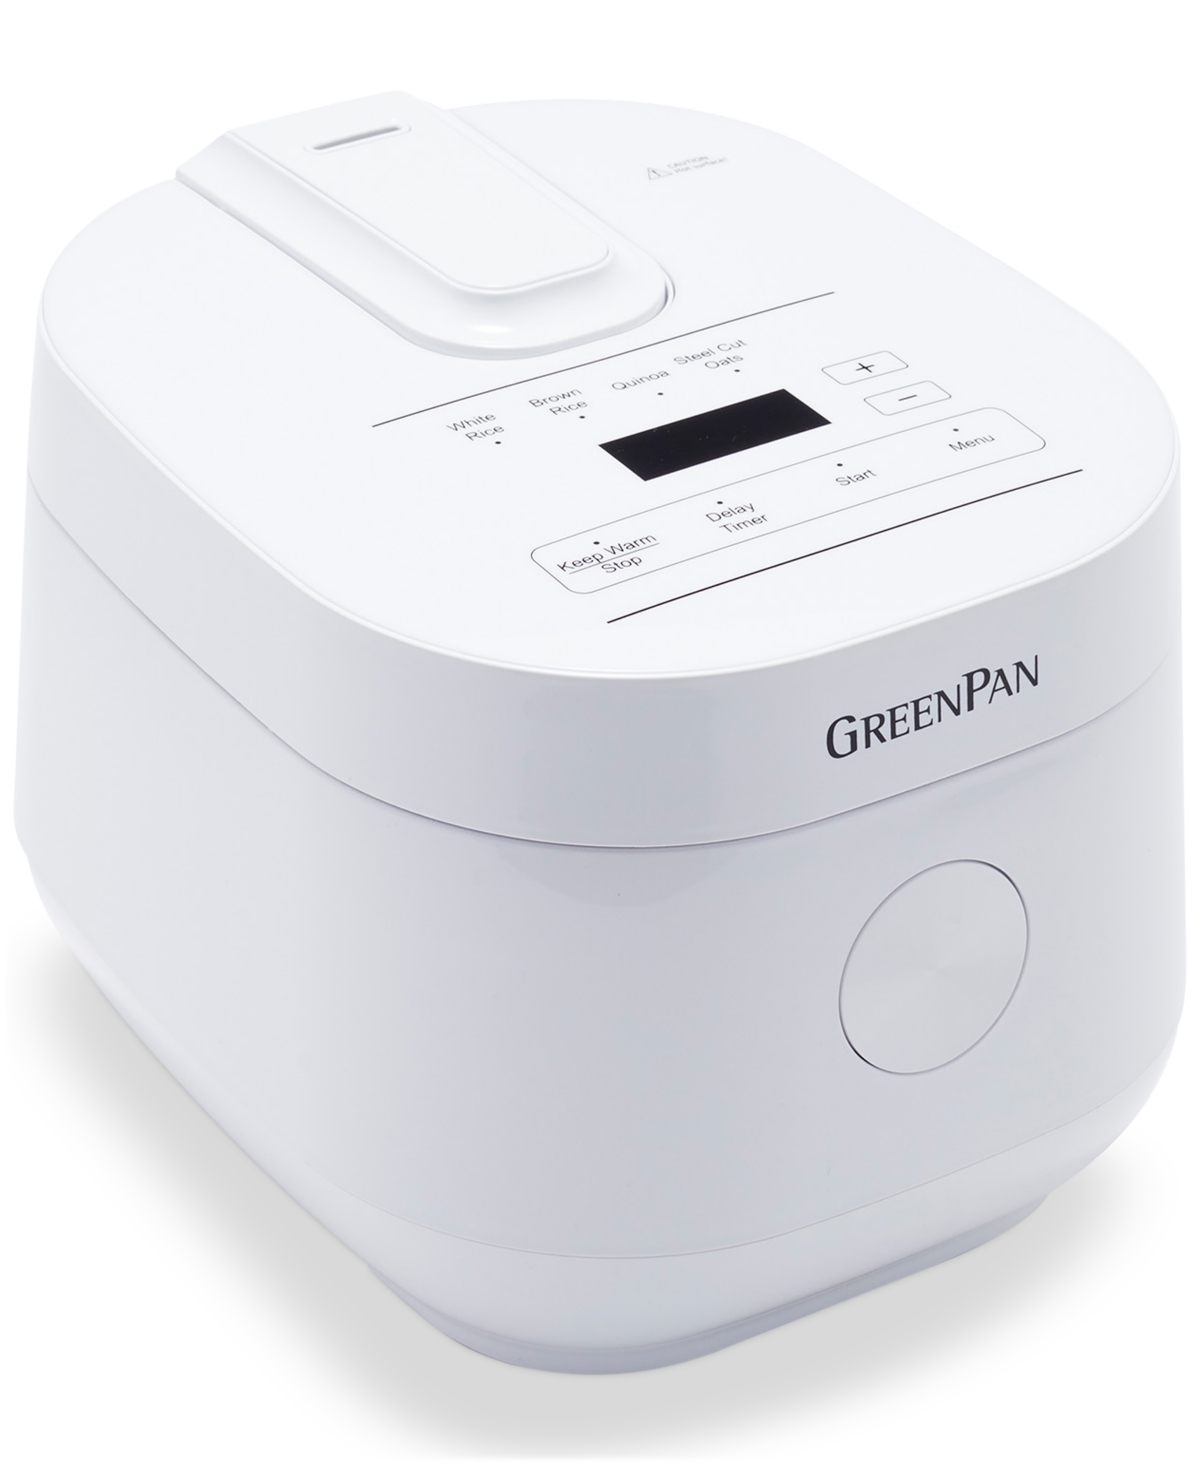 Greenpan 8-cup Ceramic Nonstick Electric Rice Cooker In White